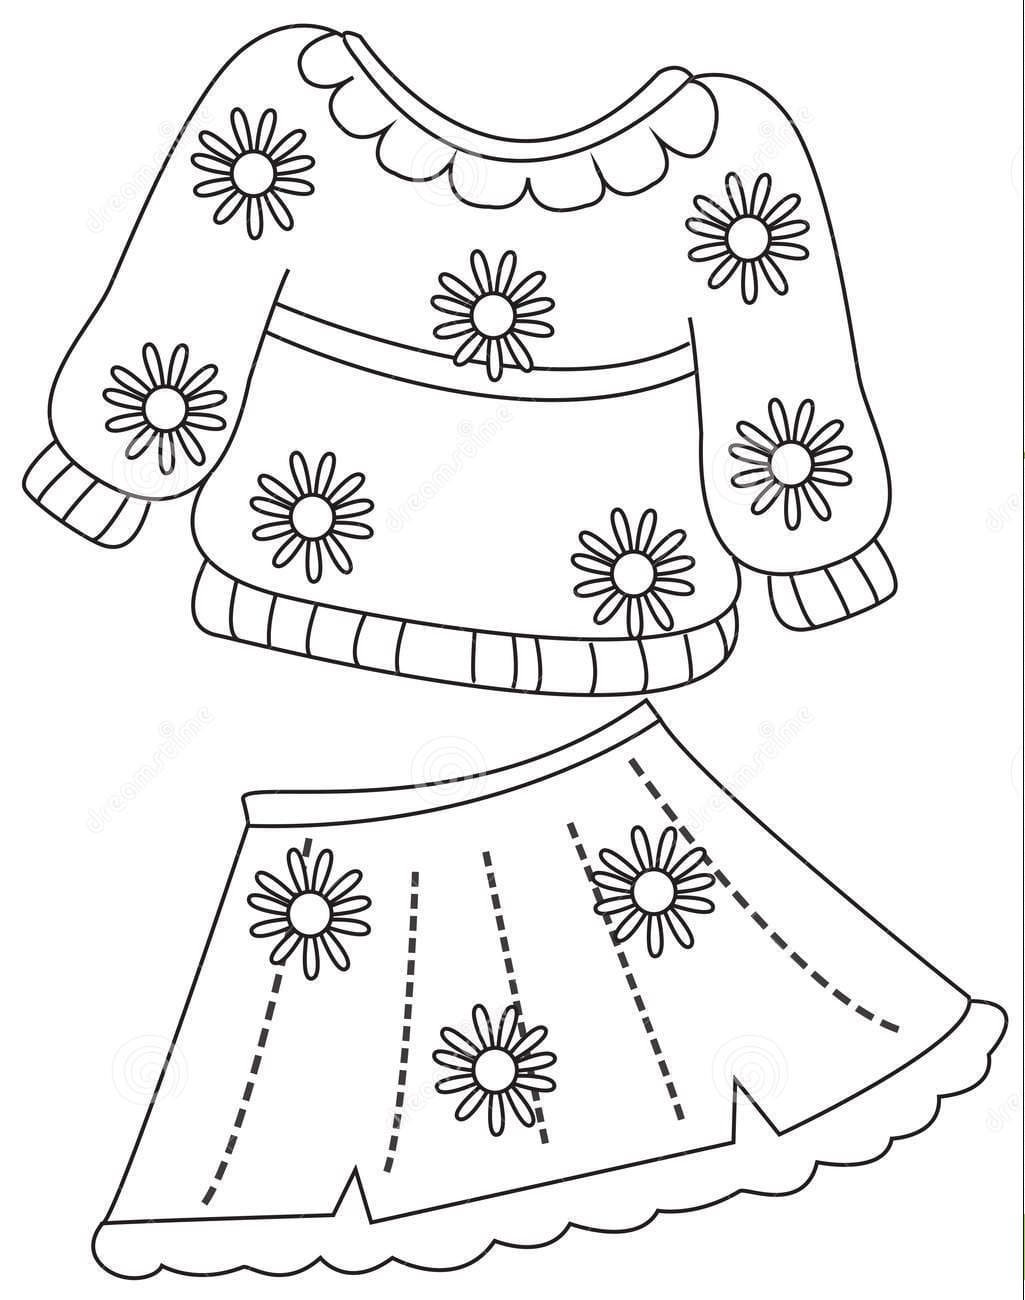 dress-coloring-pages-for-kids-boringpop